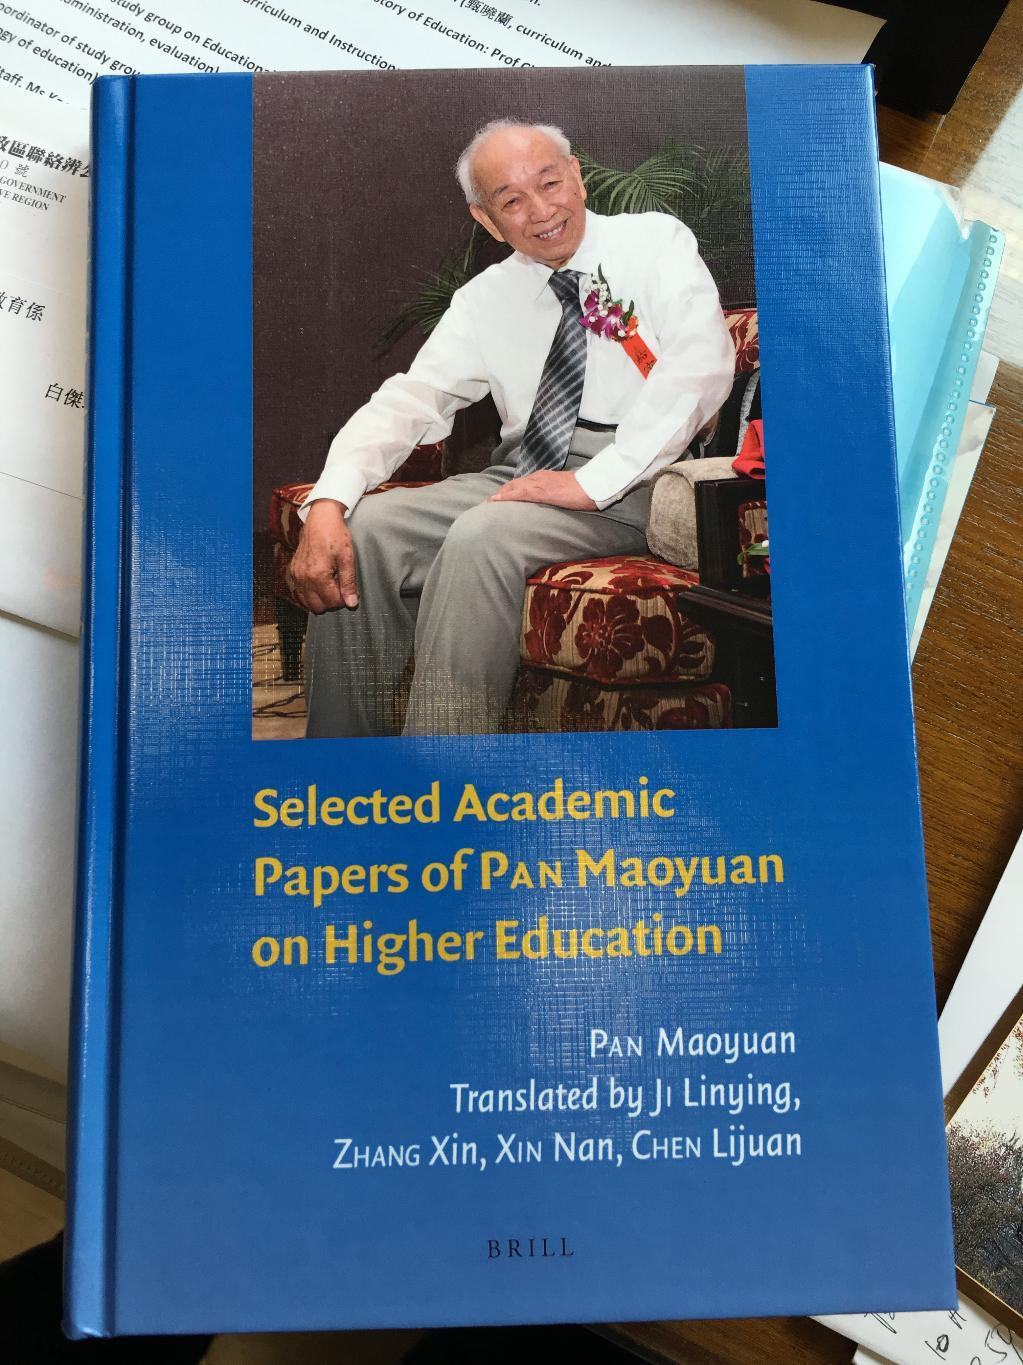 Selected Academic Papers of Pan Maoyuan on Higher Education  published by Brill Press